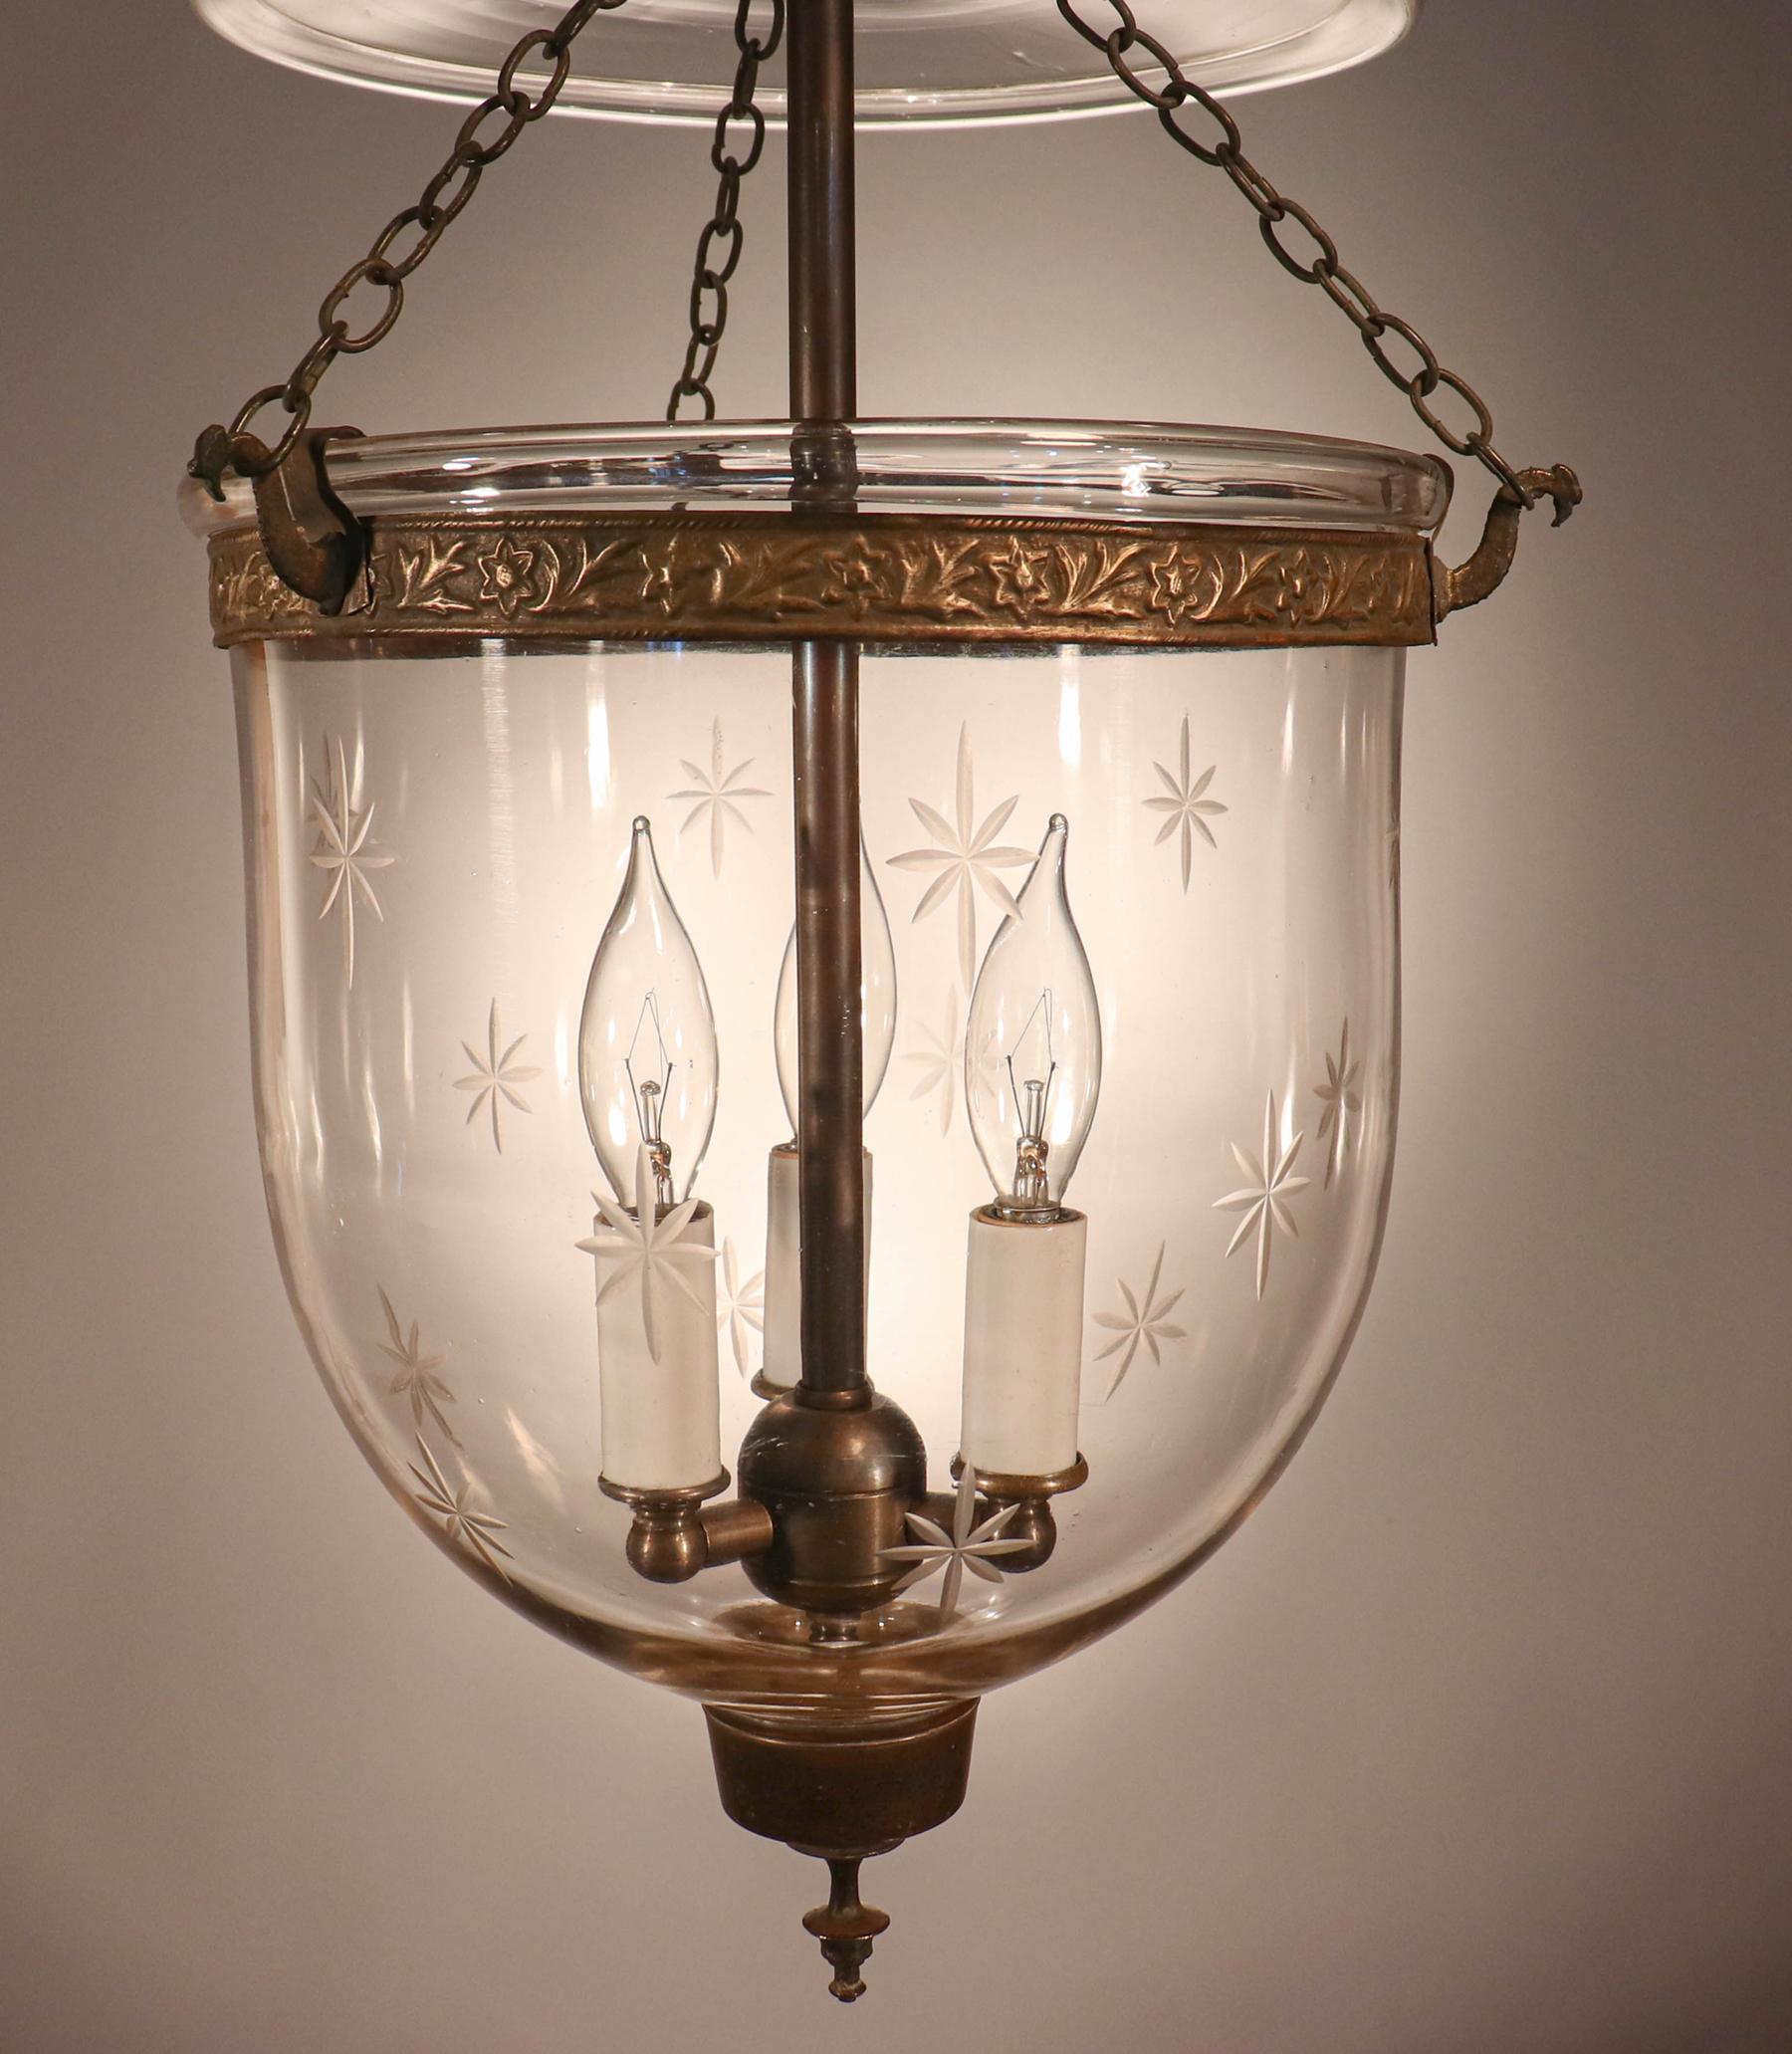 High Victorian Antique Bell Jar Lantern with Etched Stars